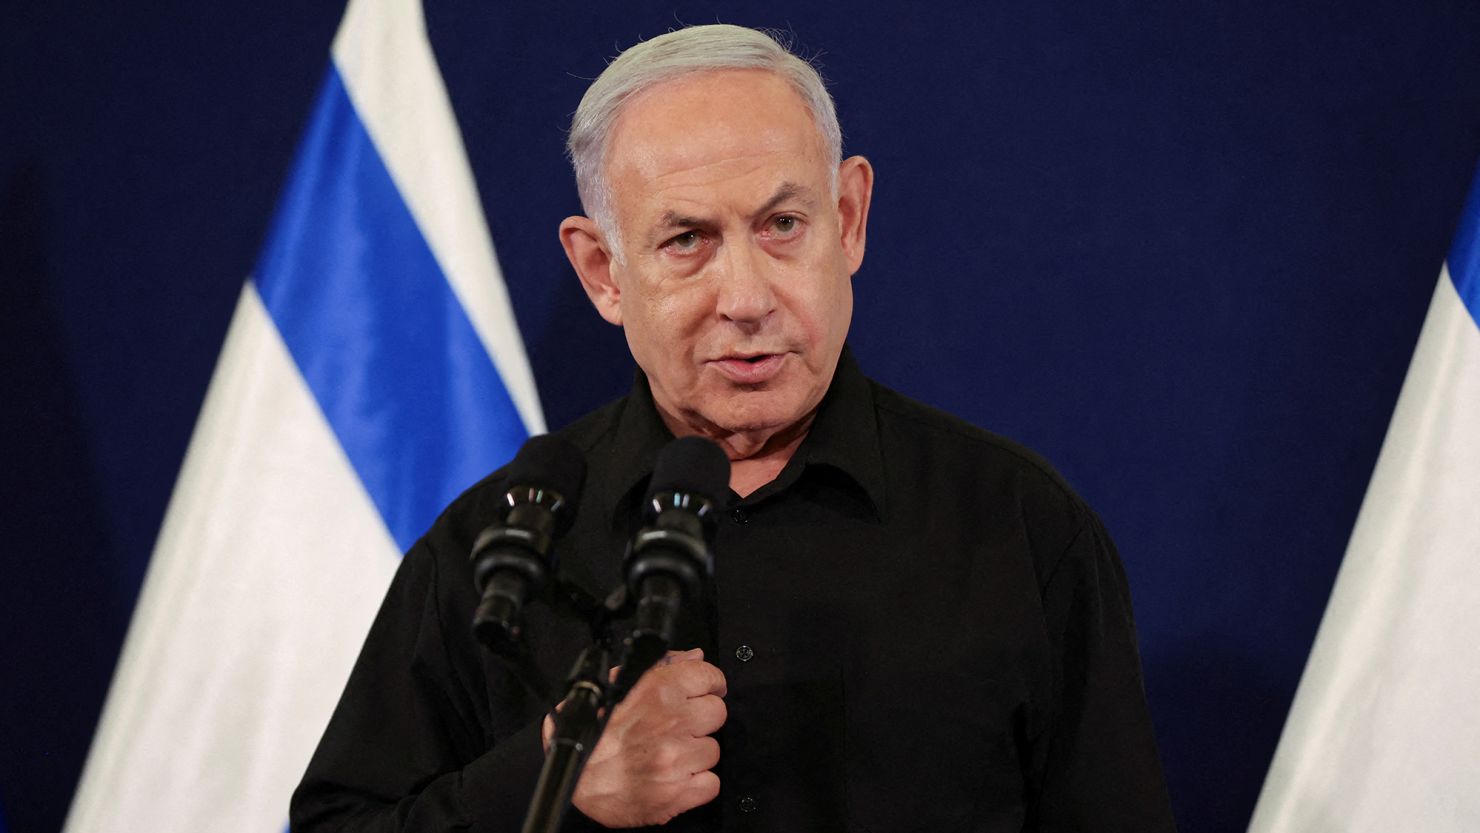 Israeli Prime Minister Benjamin Netanyahu, pictured on October 28, has condemned reports of plans by Washington to sanction an Israeli military unit over alleged abuse against Palestinians in the West Bank.